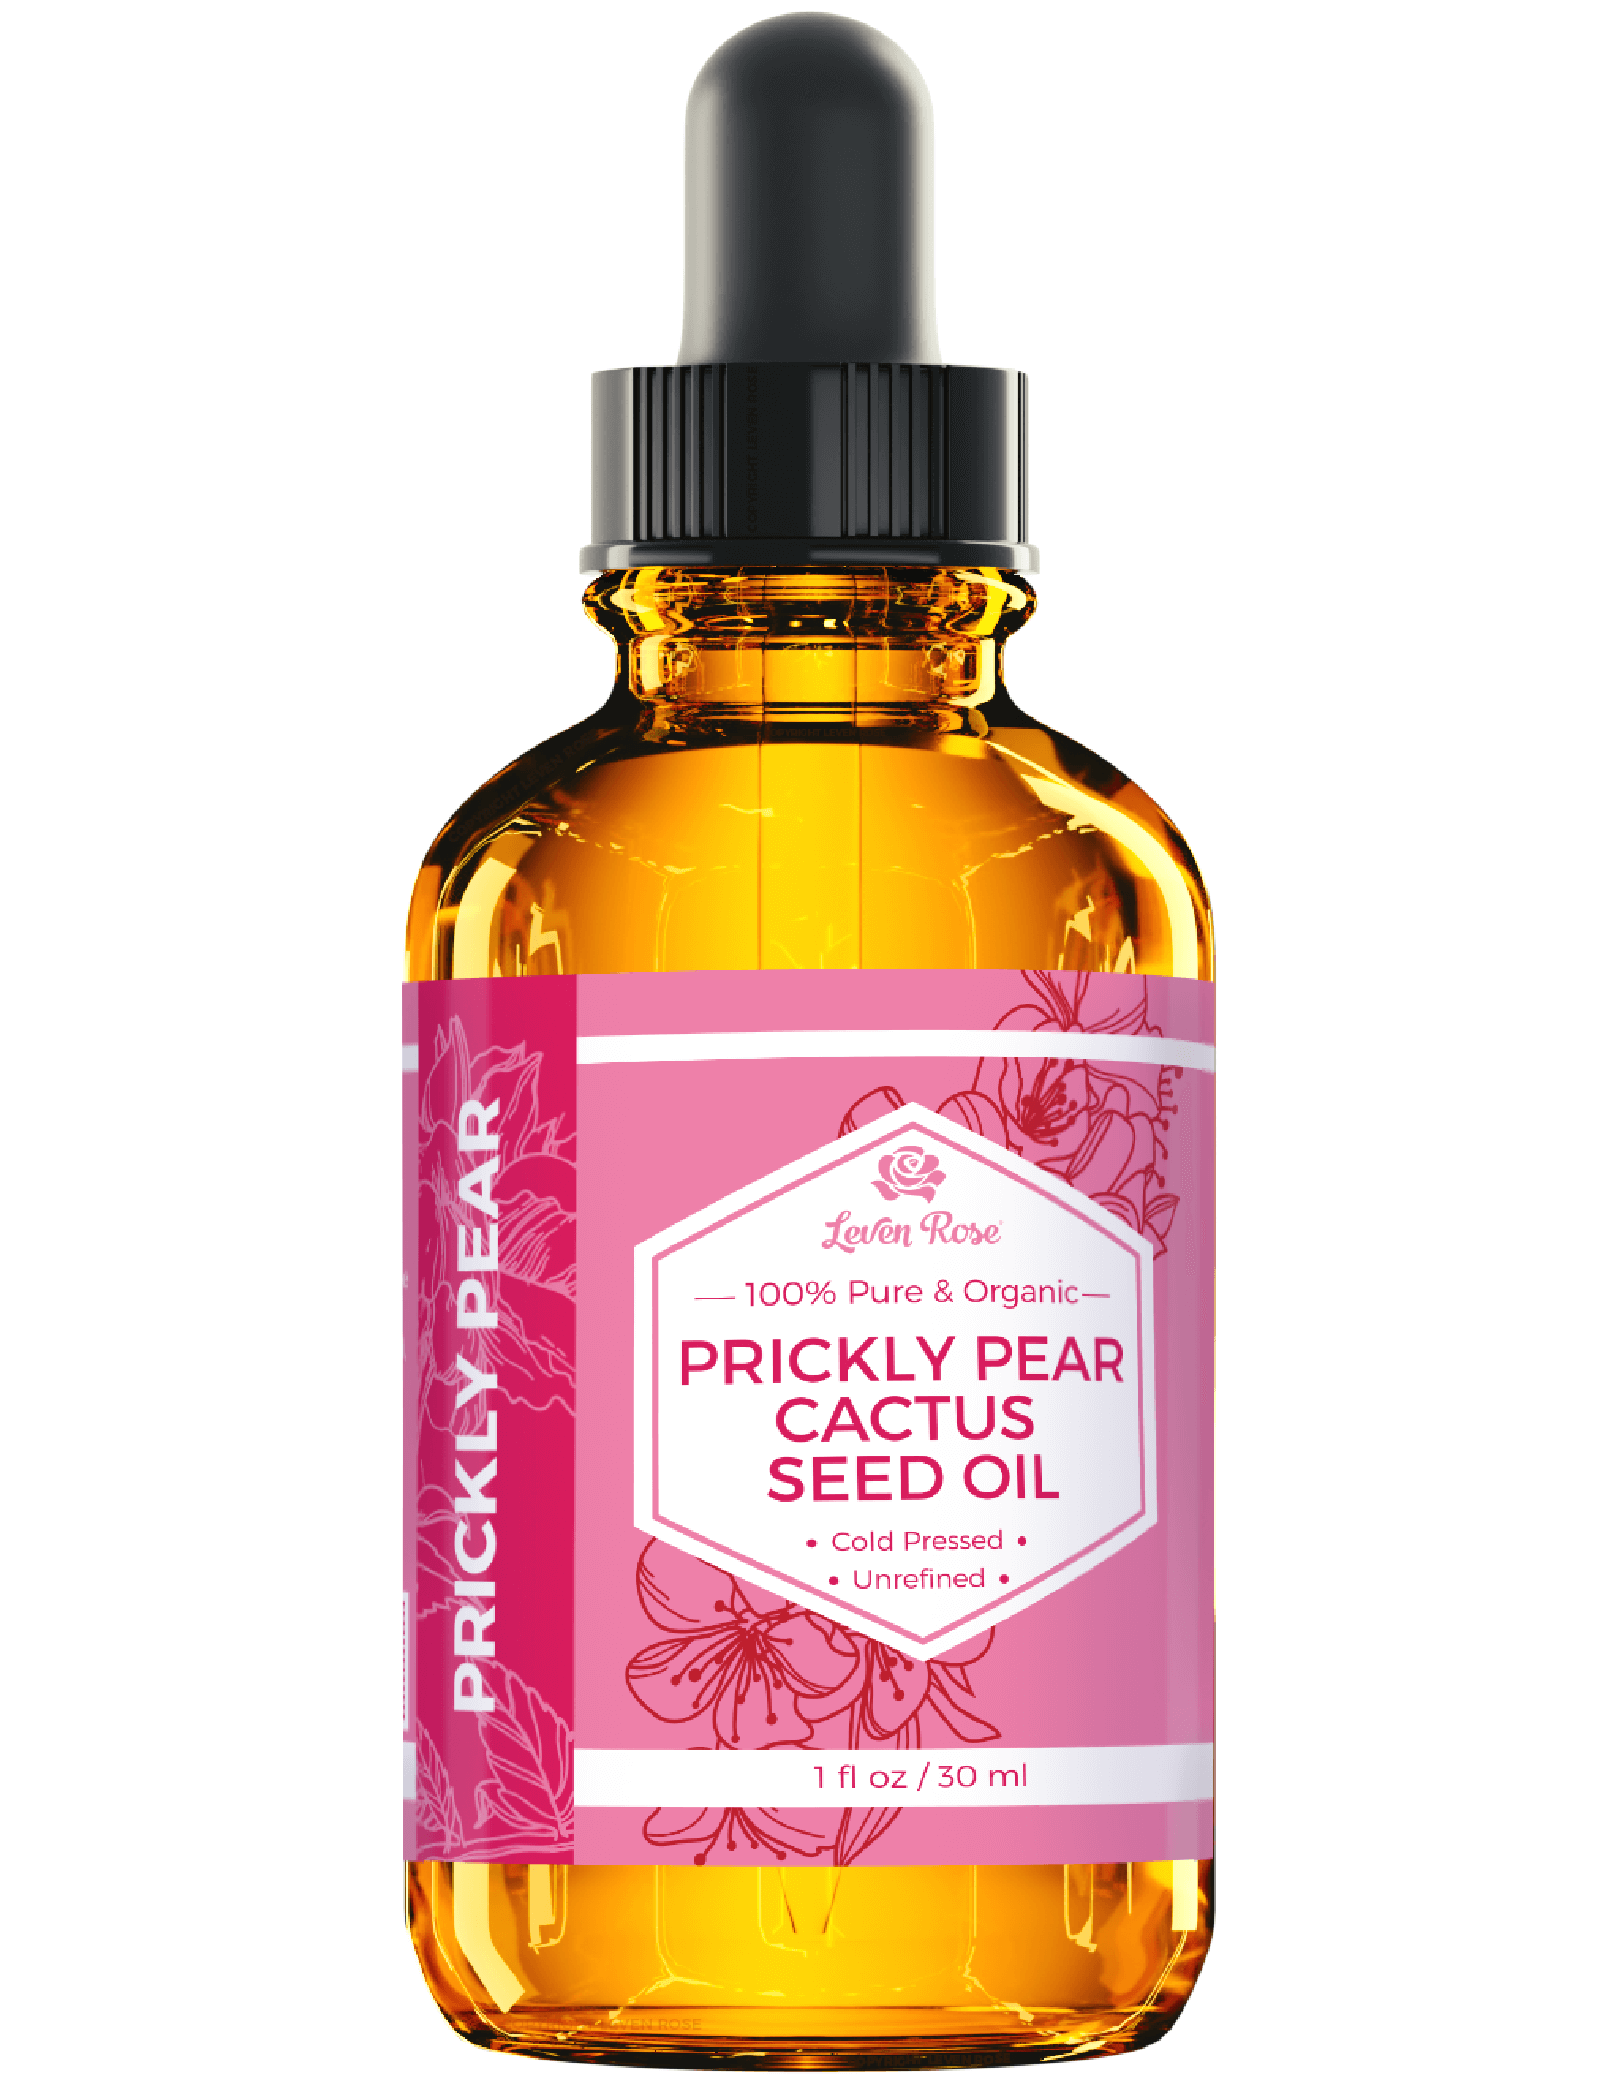 Prickly Pear Cactus Seed Oil - 1 oz by Leven Rose